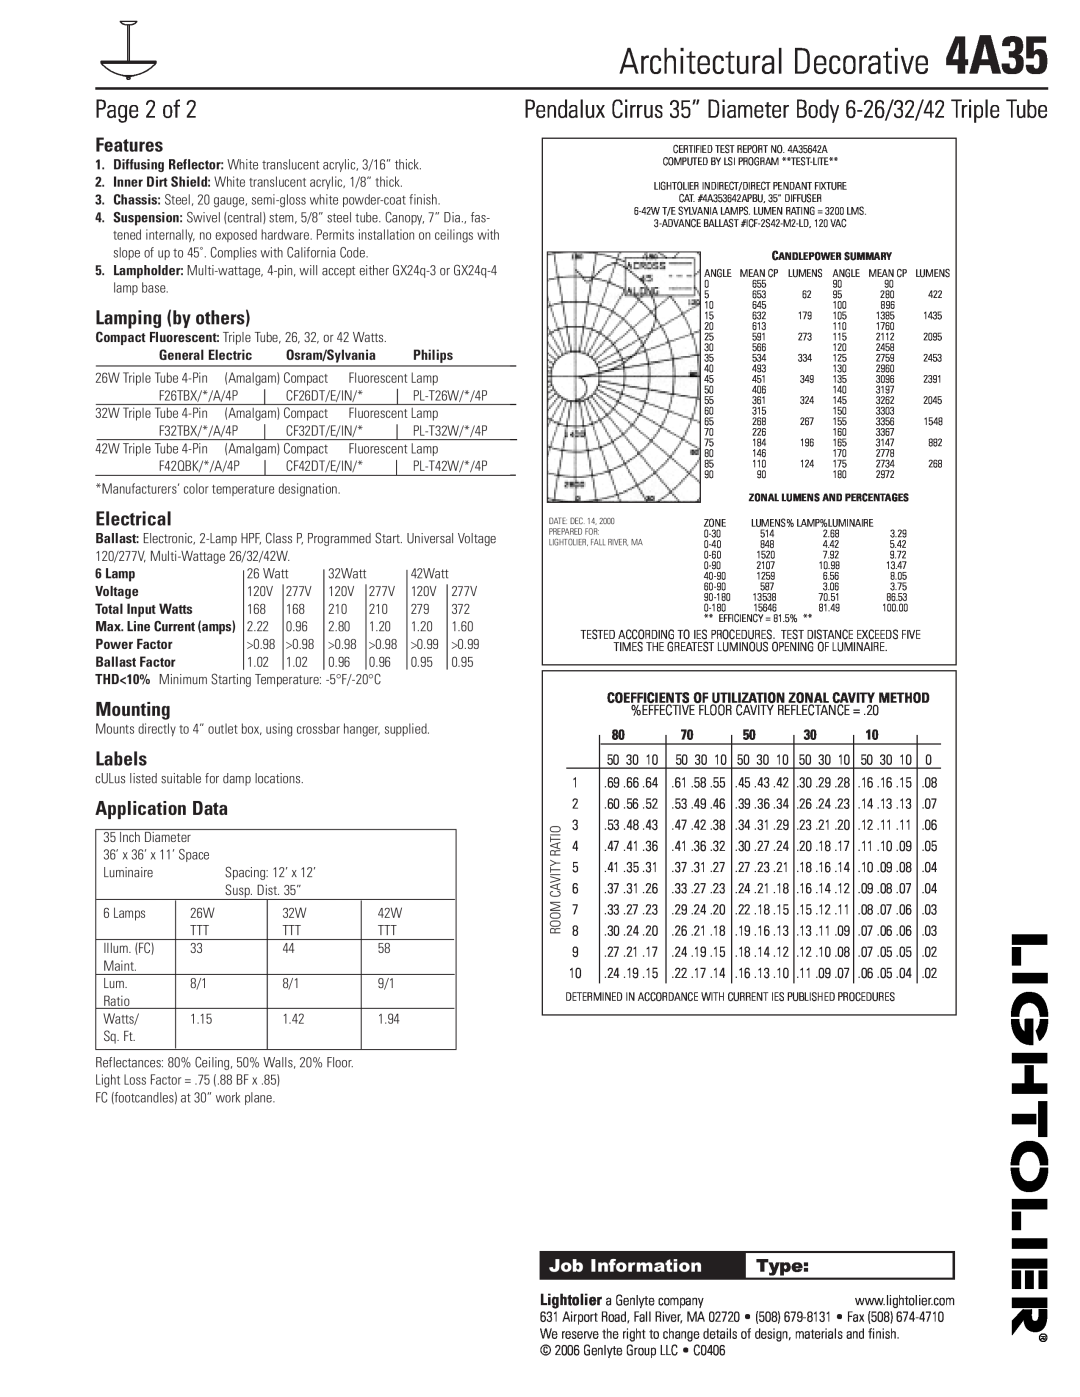 Lightolier 4A35 specifications Page 2 of, Features, Lamping by others, Electrical, Mounting, Labels, Application Data, Type 